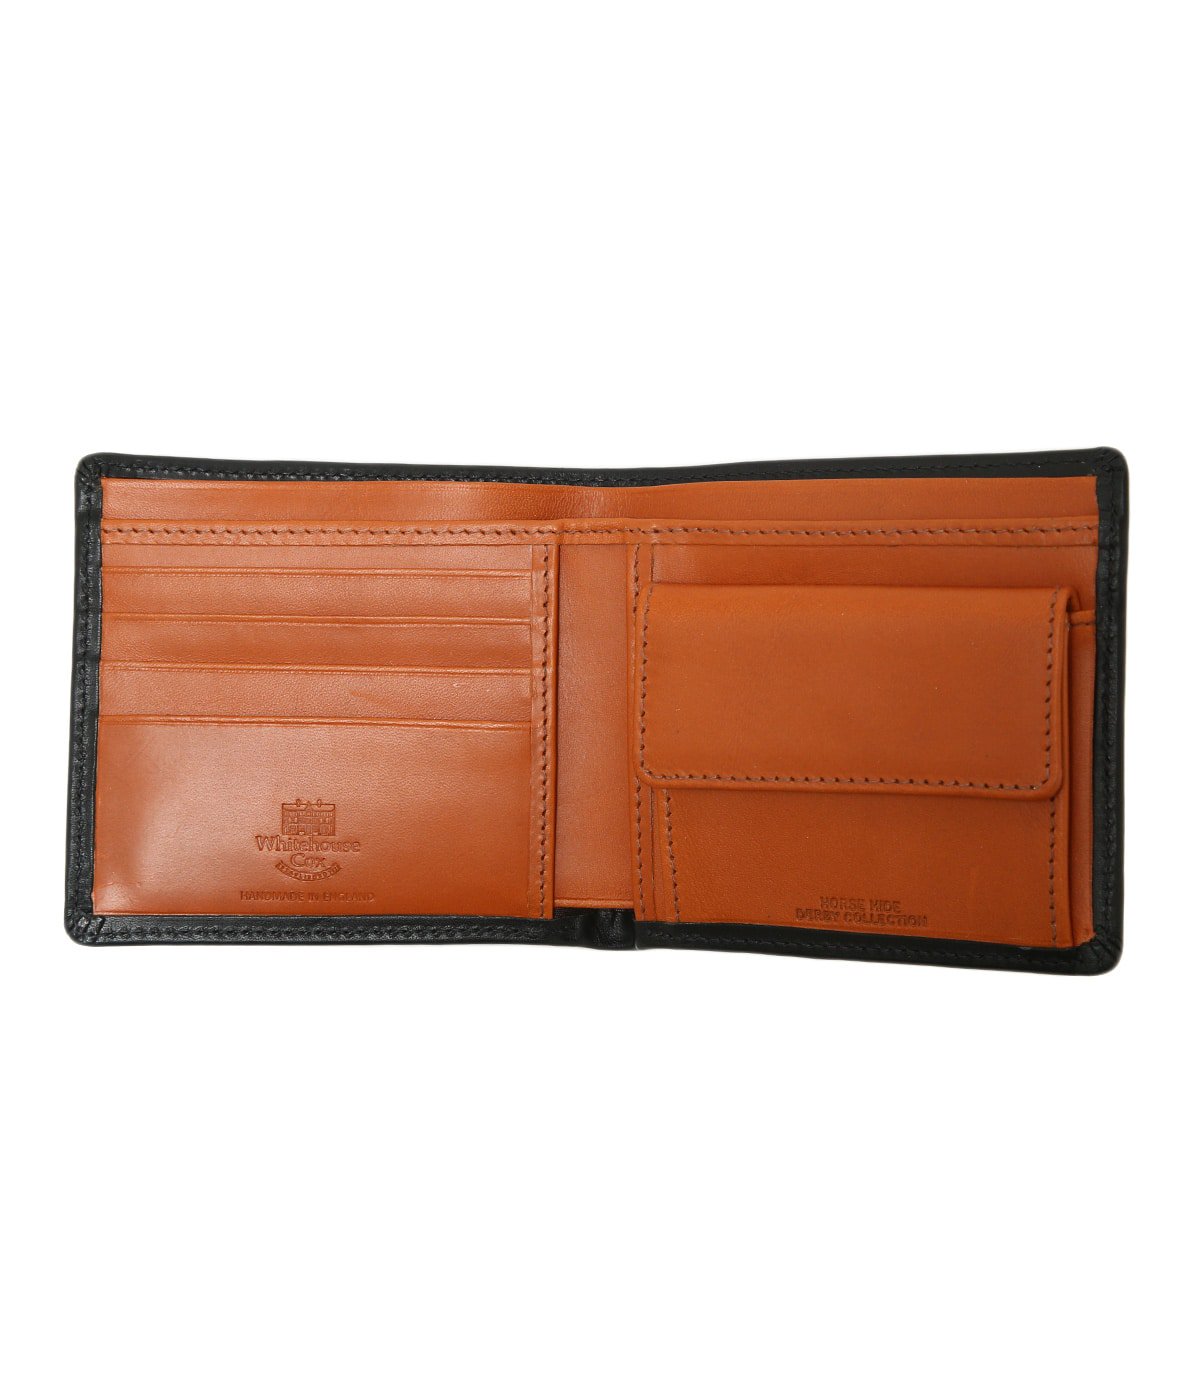 NOTECASE WITH COIN CASE DERBY COLLECTION